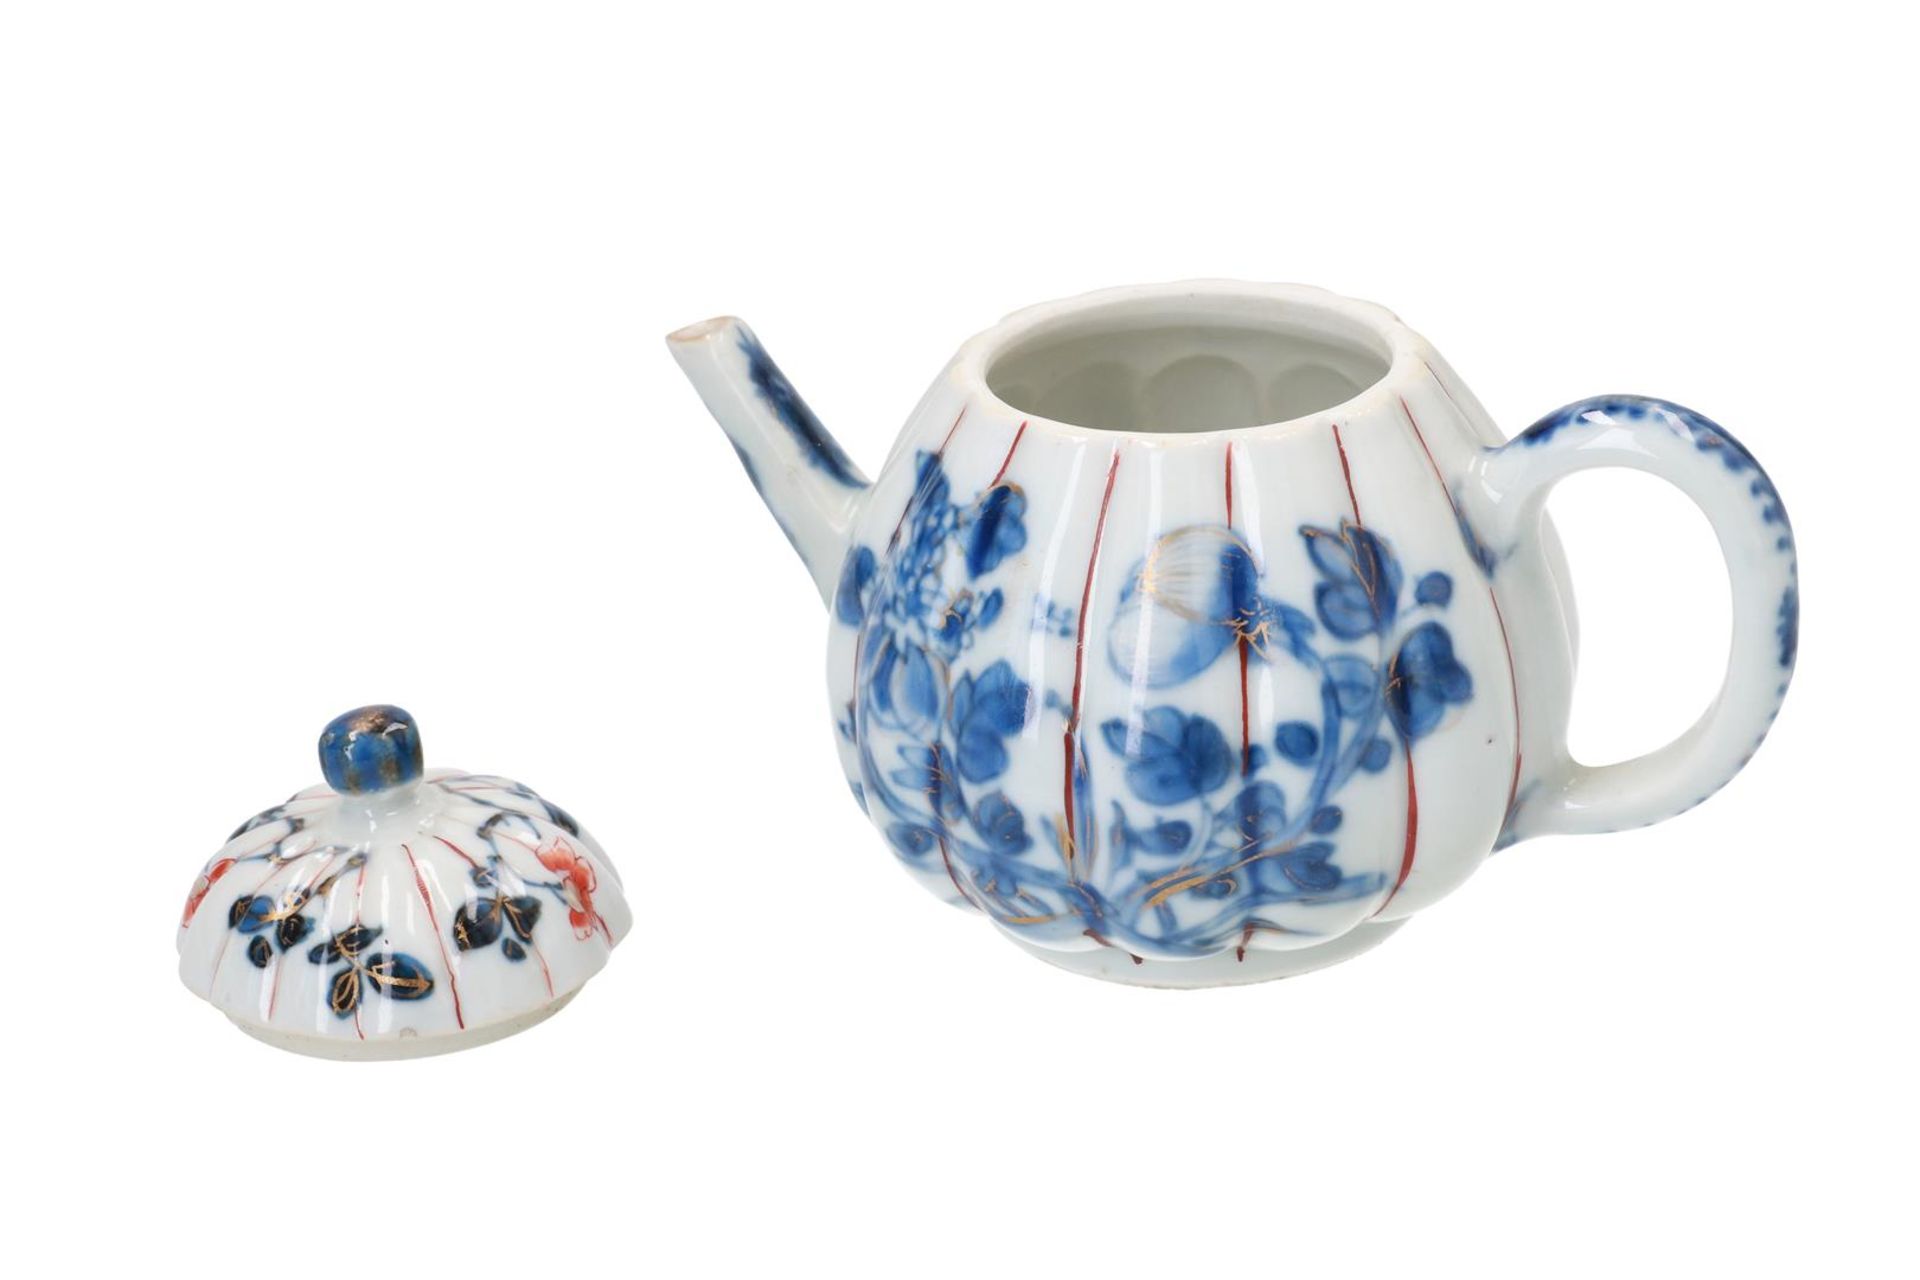 A pair of Imari porcelain teapots with lobbed belly and floral decor. Unmarked. China, 18th century. - Image 3 of 6